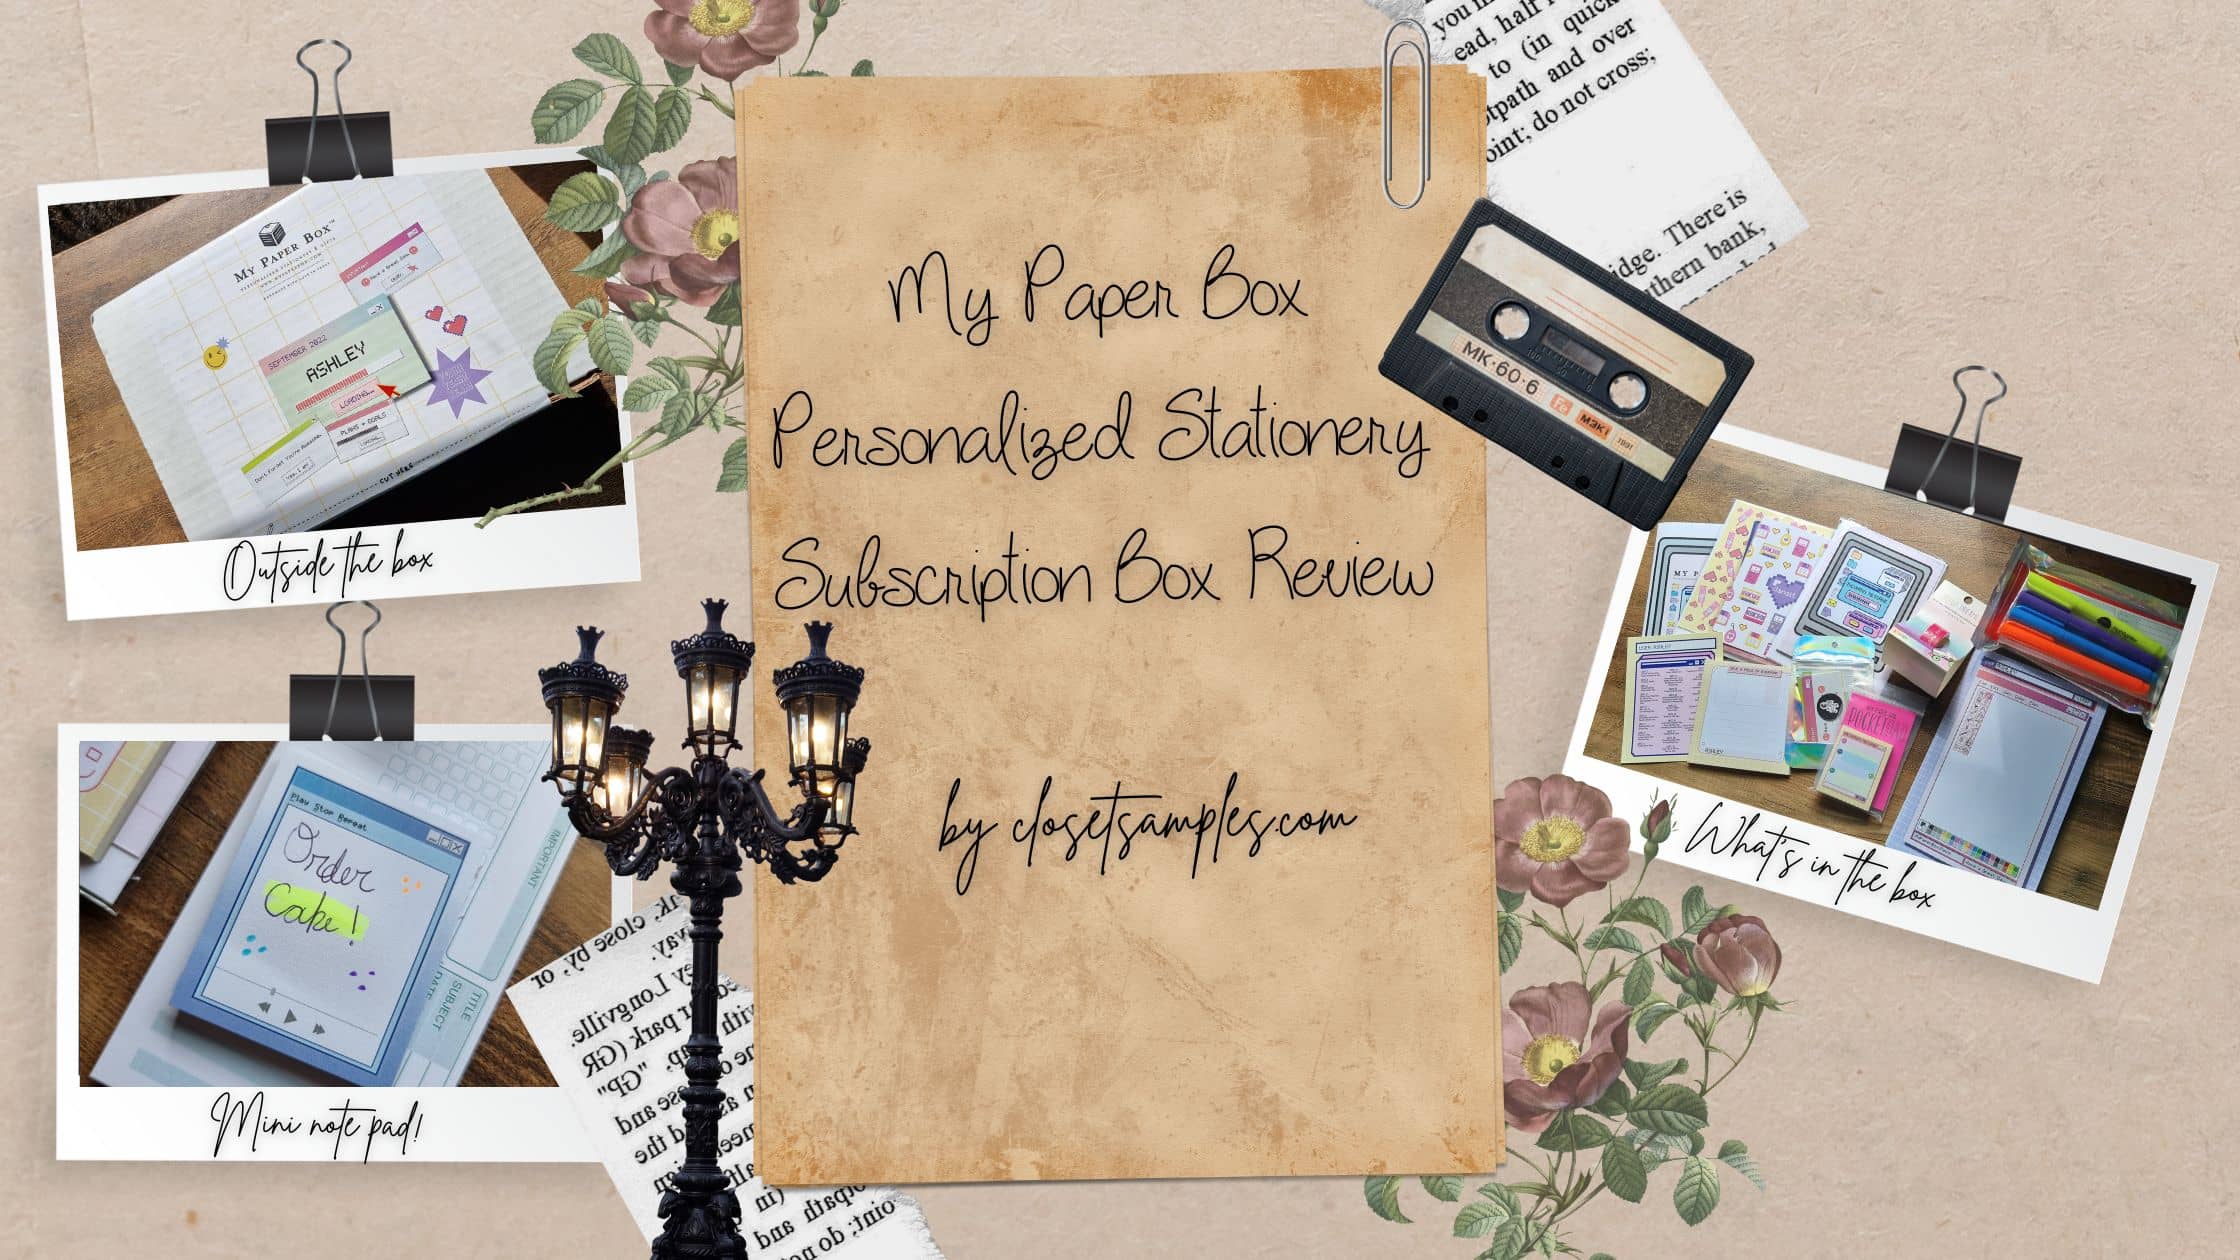 My Paper Box Personalized Stationery Subscription Box Review closetsamples